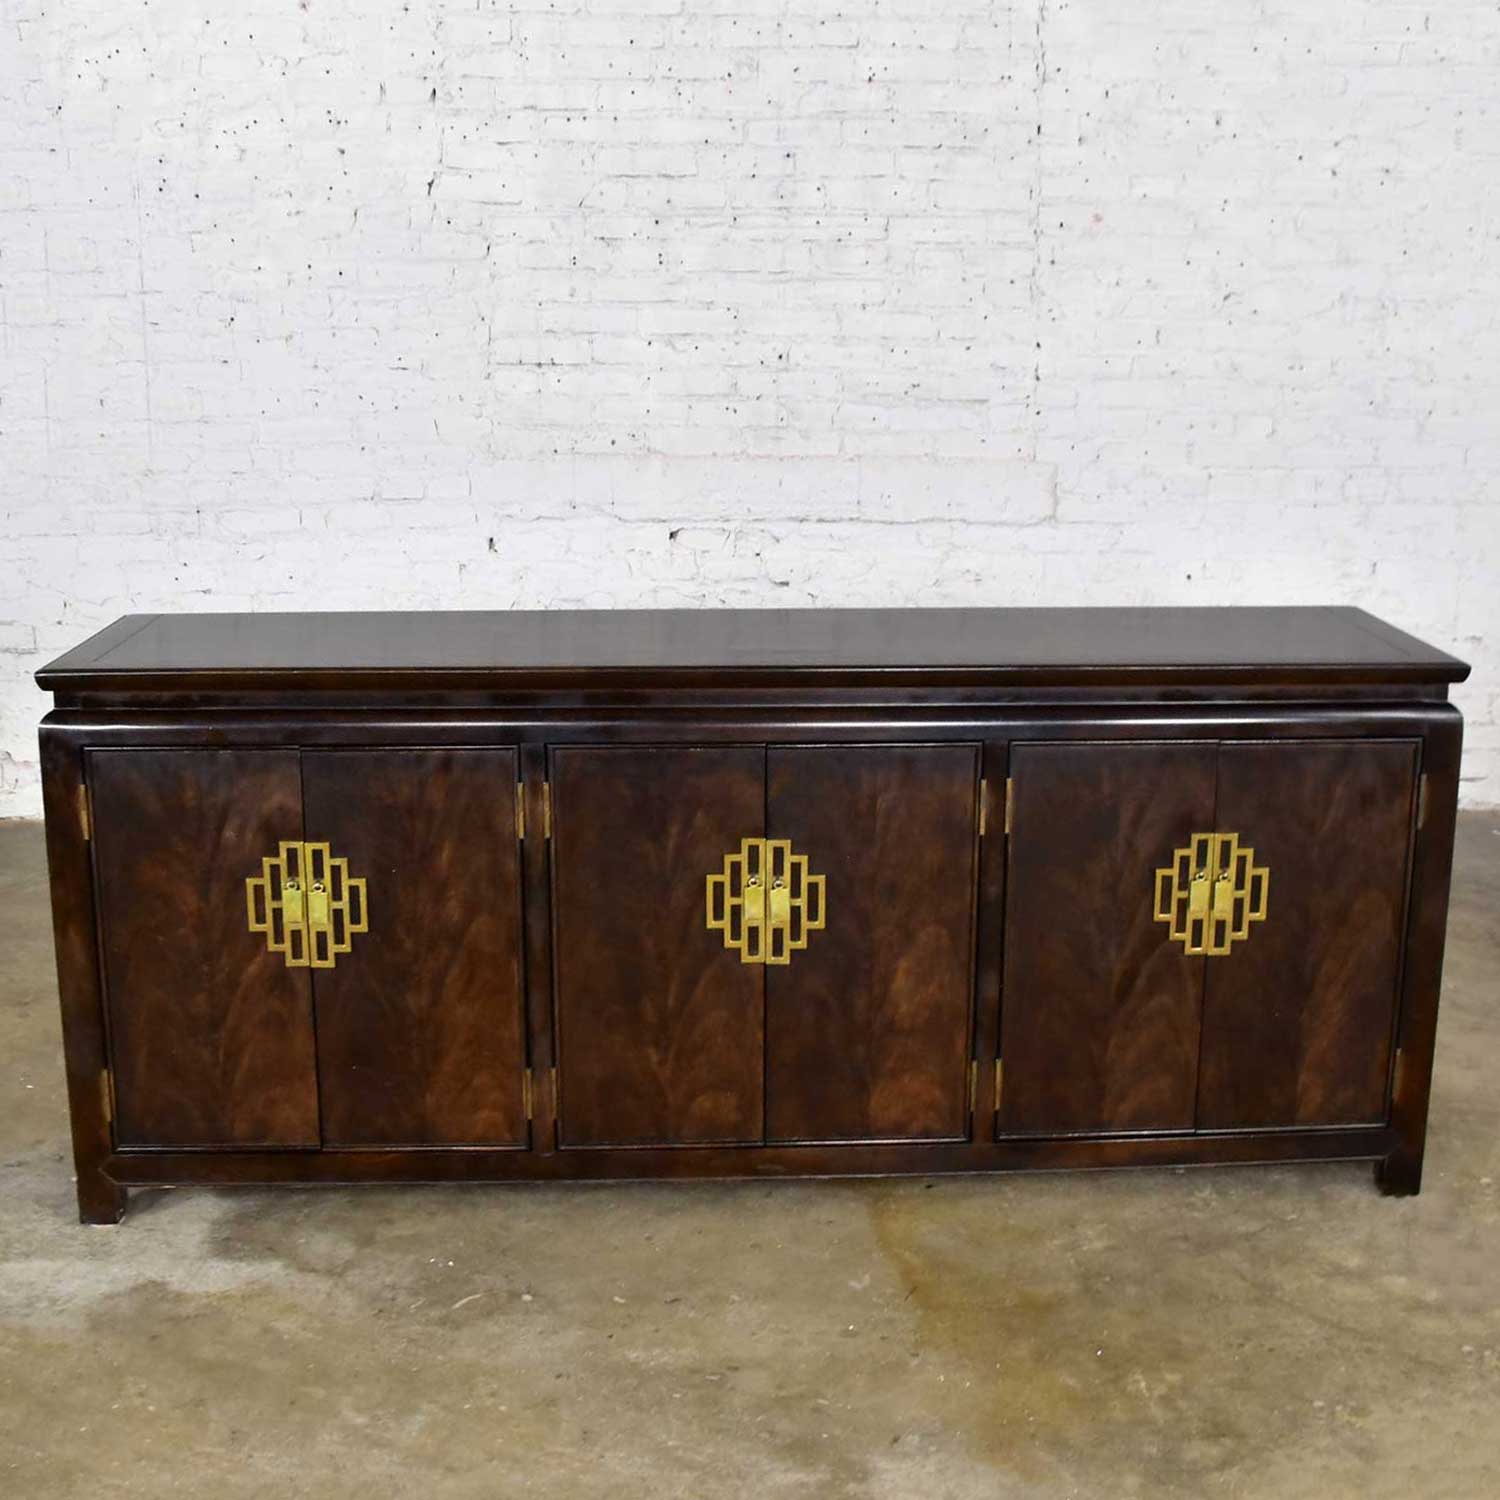 Chin Hua Buffet or Credenza by Raymond K. Sobota for Century Furniture